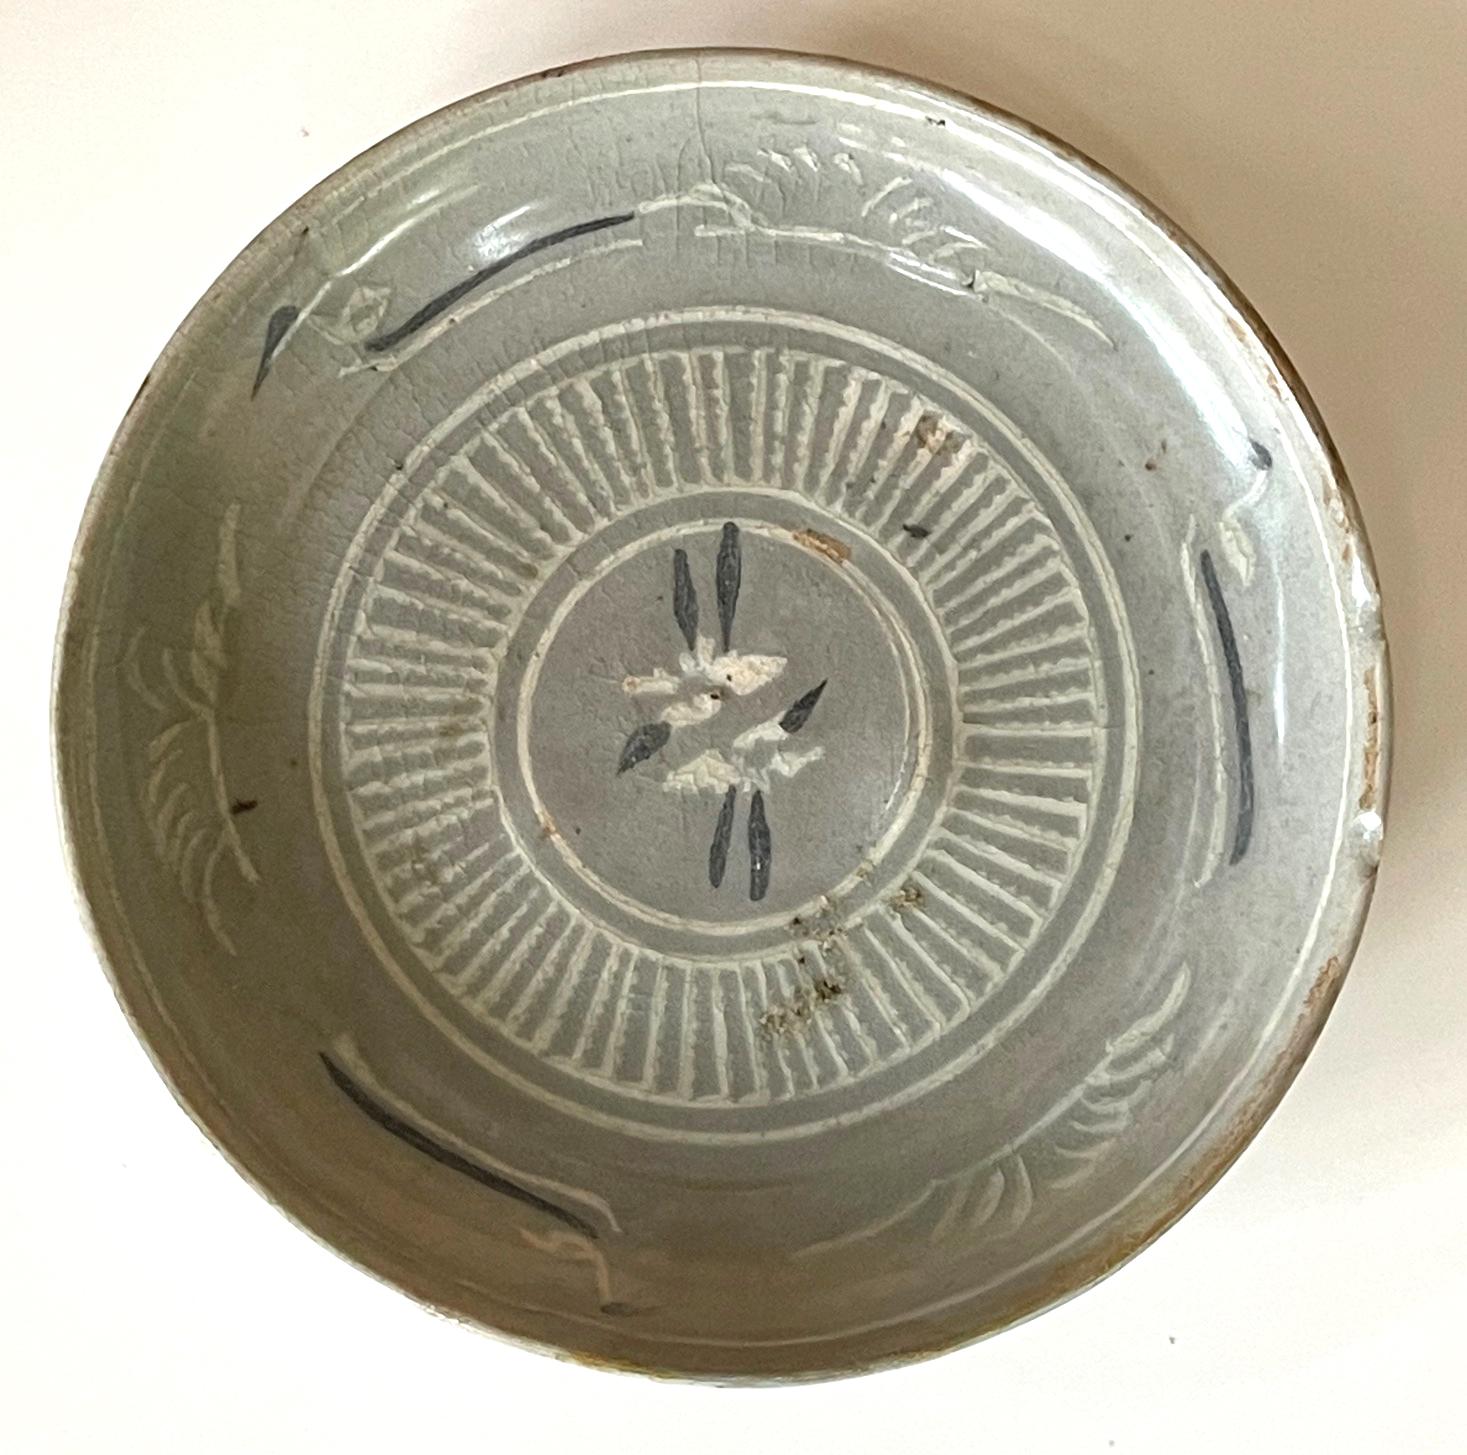 The round ceramic plate with a slightly raised foot ring is dated from late Korean Goryeo Kingdom (918 to 1392 AD) likely toward the end of the 14th century. The plate features a celadon glaze and underglaze slip inlays in black and white. The